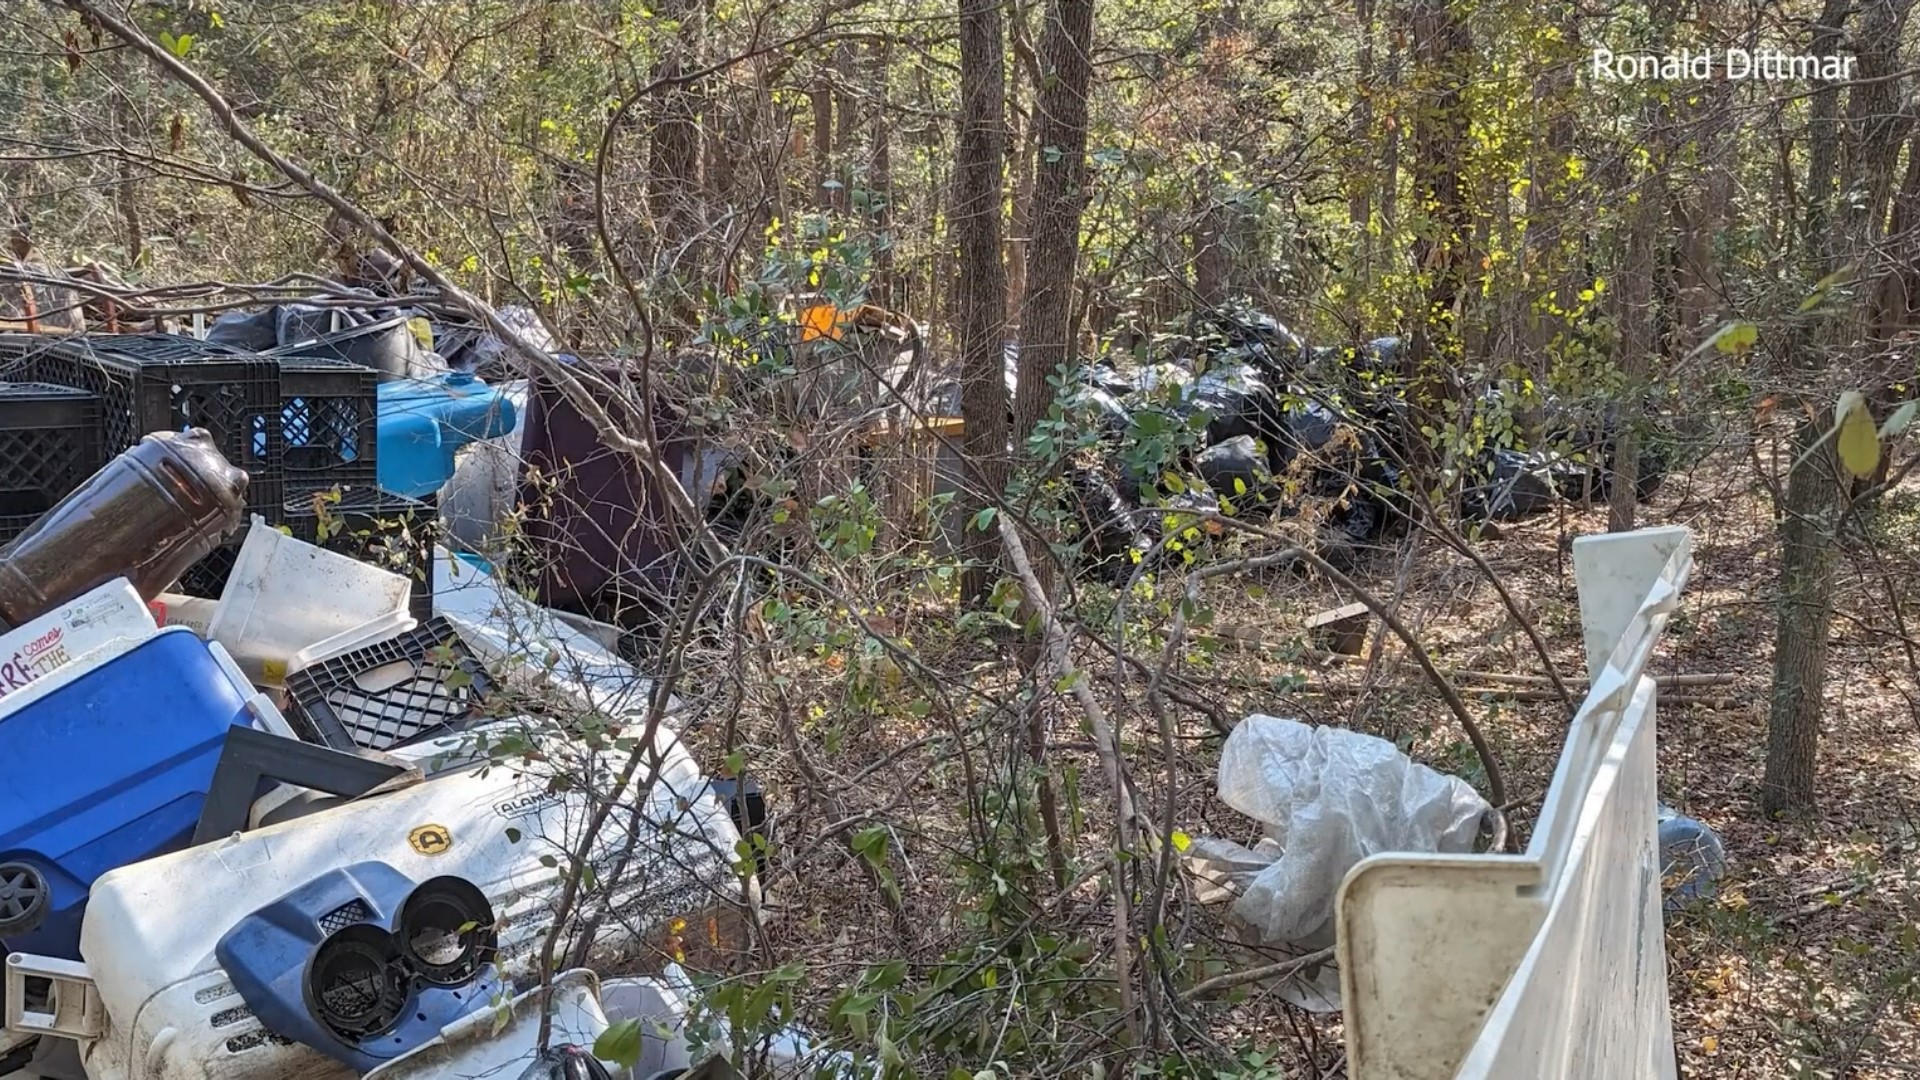 An encampment cleanup is wrapping up along a popular hiking trail in Austin. It took three months and $200,000 to relocate dozens of people.